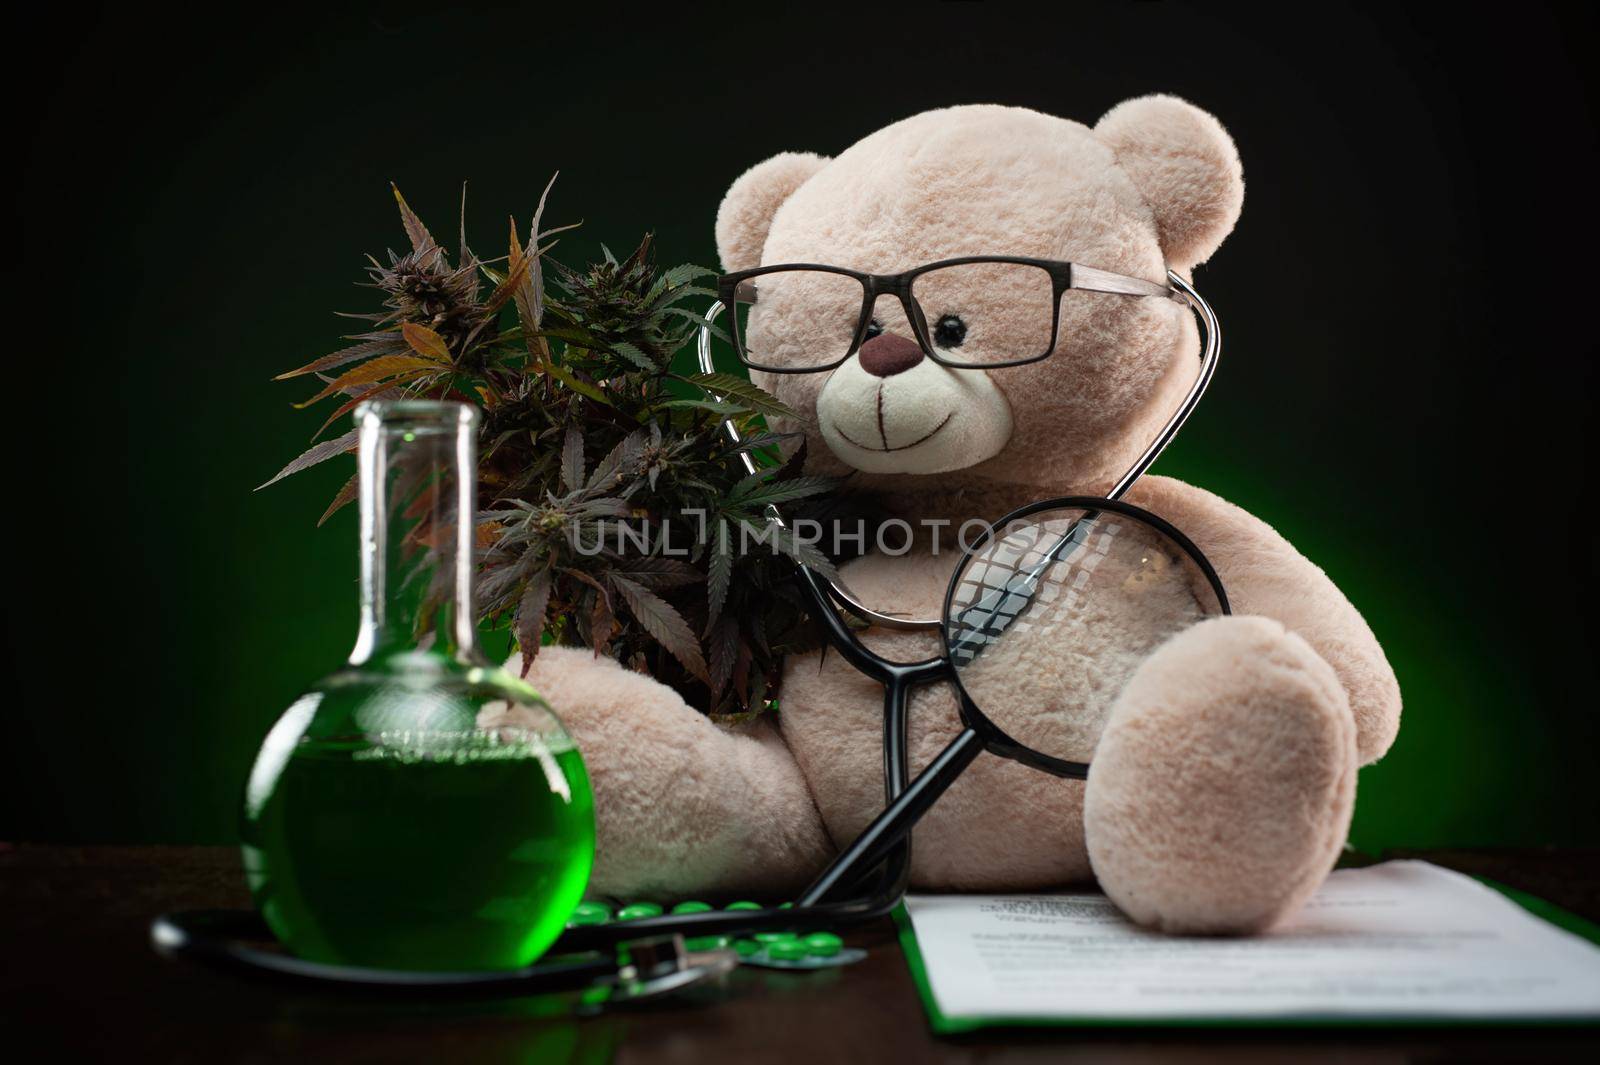 cannabis plant for medical purposes and research , creative composition with a teddy bear by Rotozey